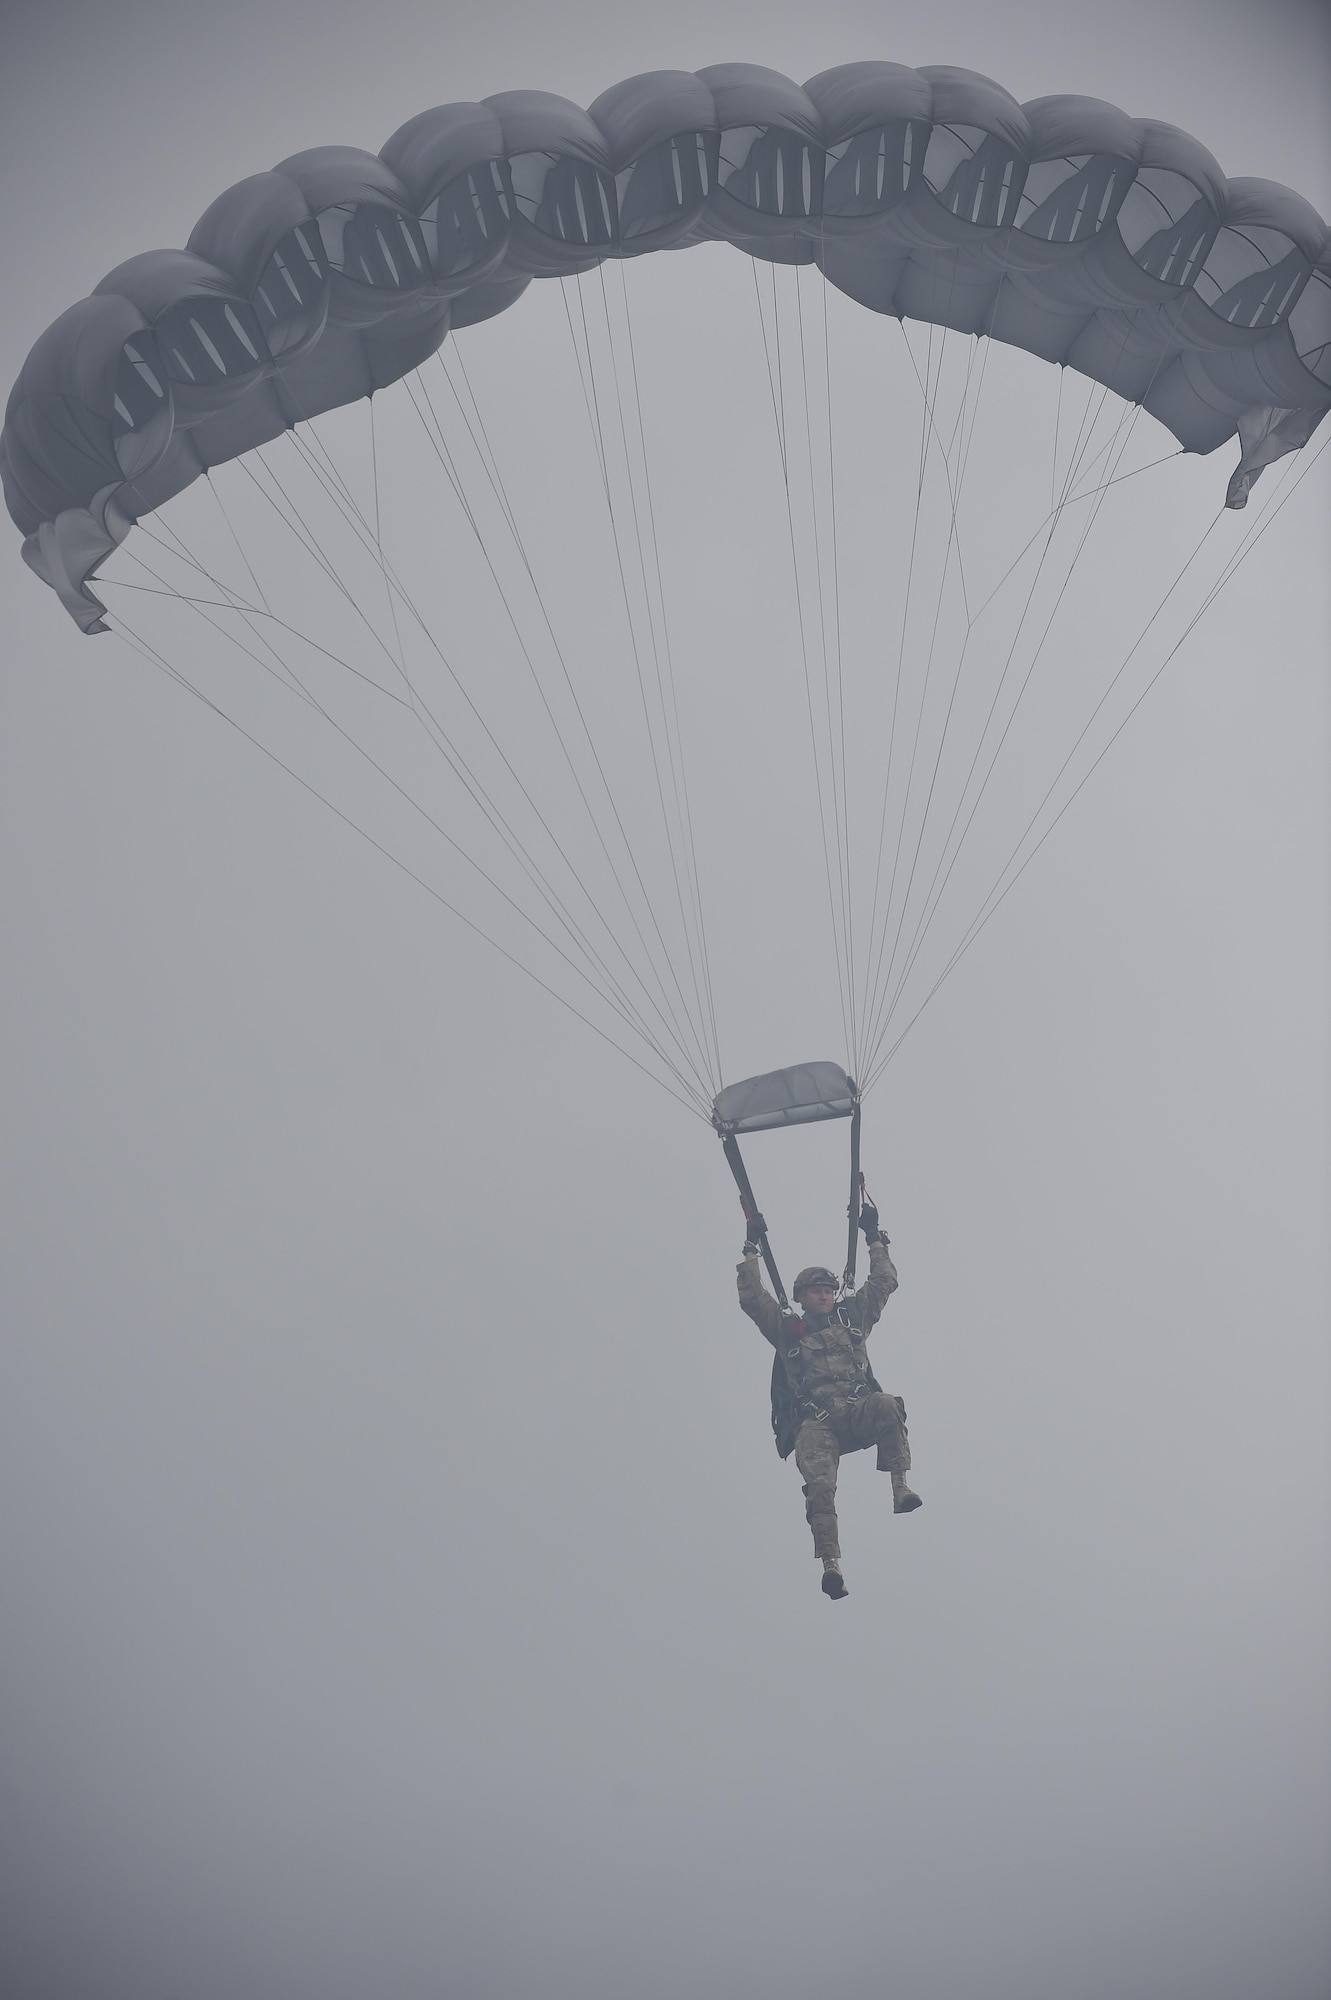 Chief Master Sgt. Bruce W. Dixon, the command chief master sergeant of the 24th Special Operations Wing, conducts his final military jump at Hurlburt Field, Fla., May 3, 2016. Dixon, who is retiring after a 30-year career as a combat controller, is one of a handful of military members to complete three free-fall jumps into combat since the Vietnam War. (U.S. Air Force photo by Airman 1st Class Kai White) 